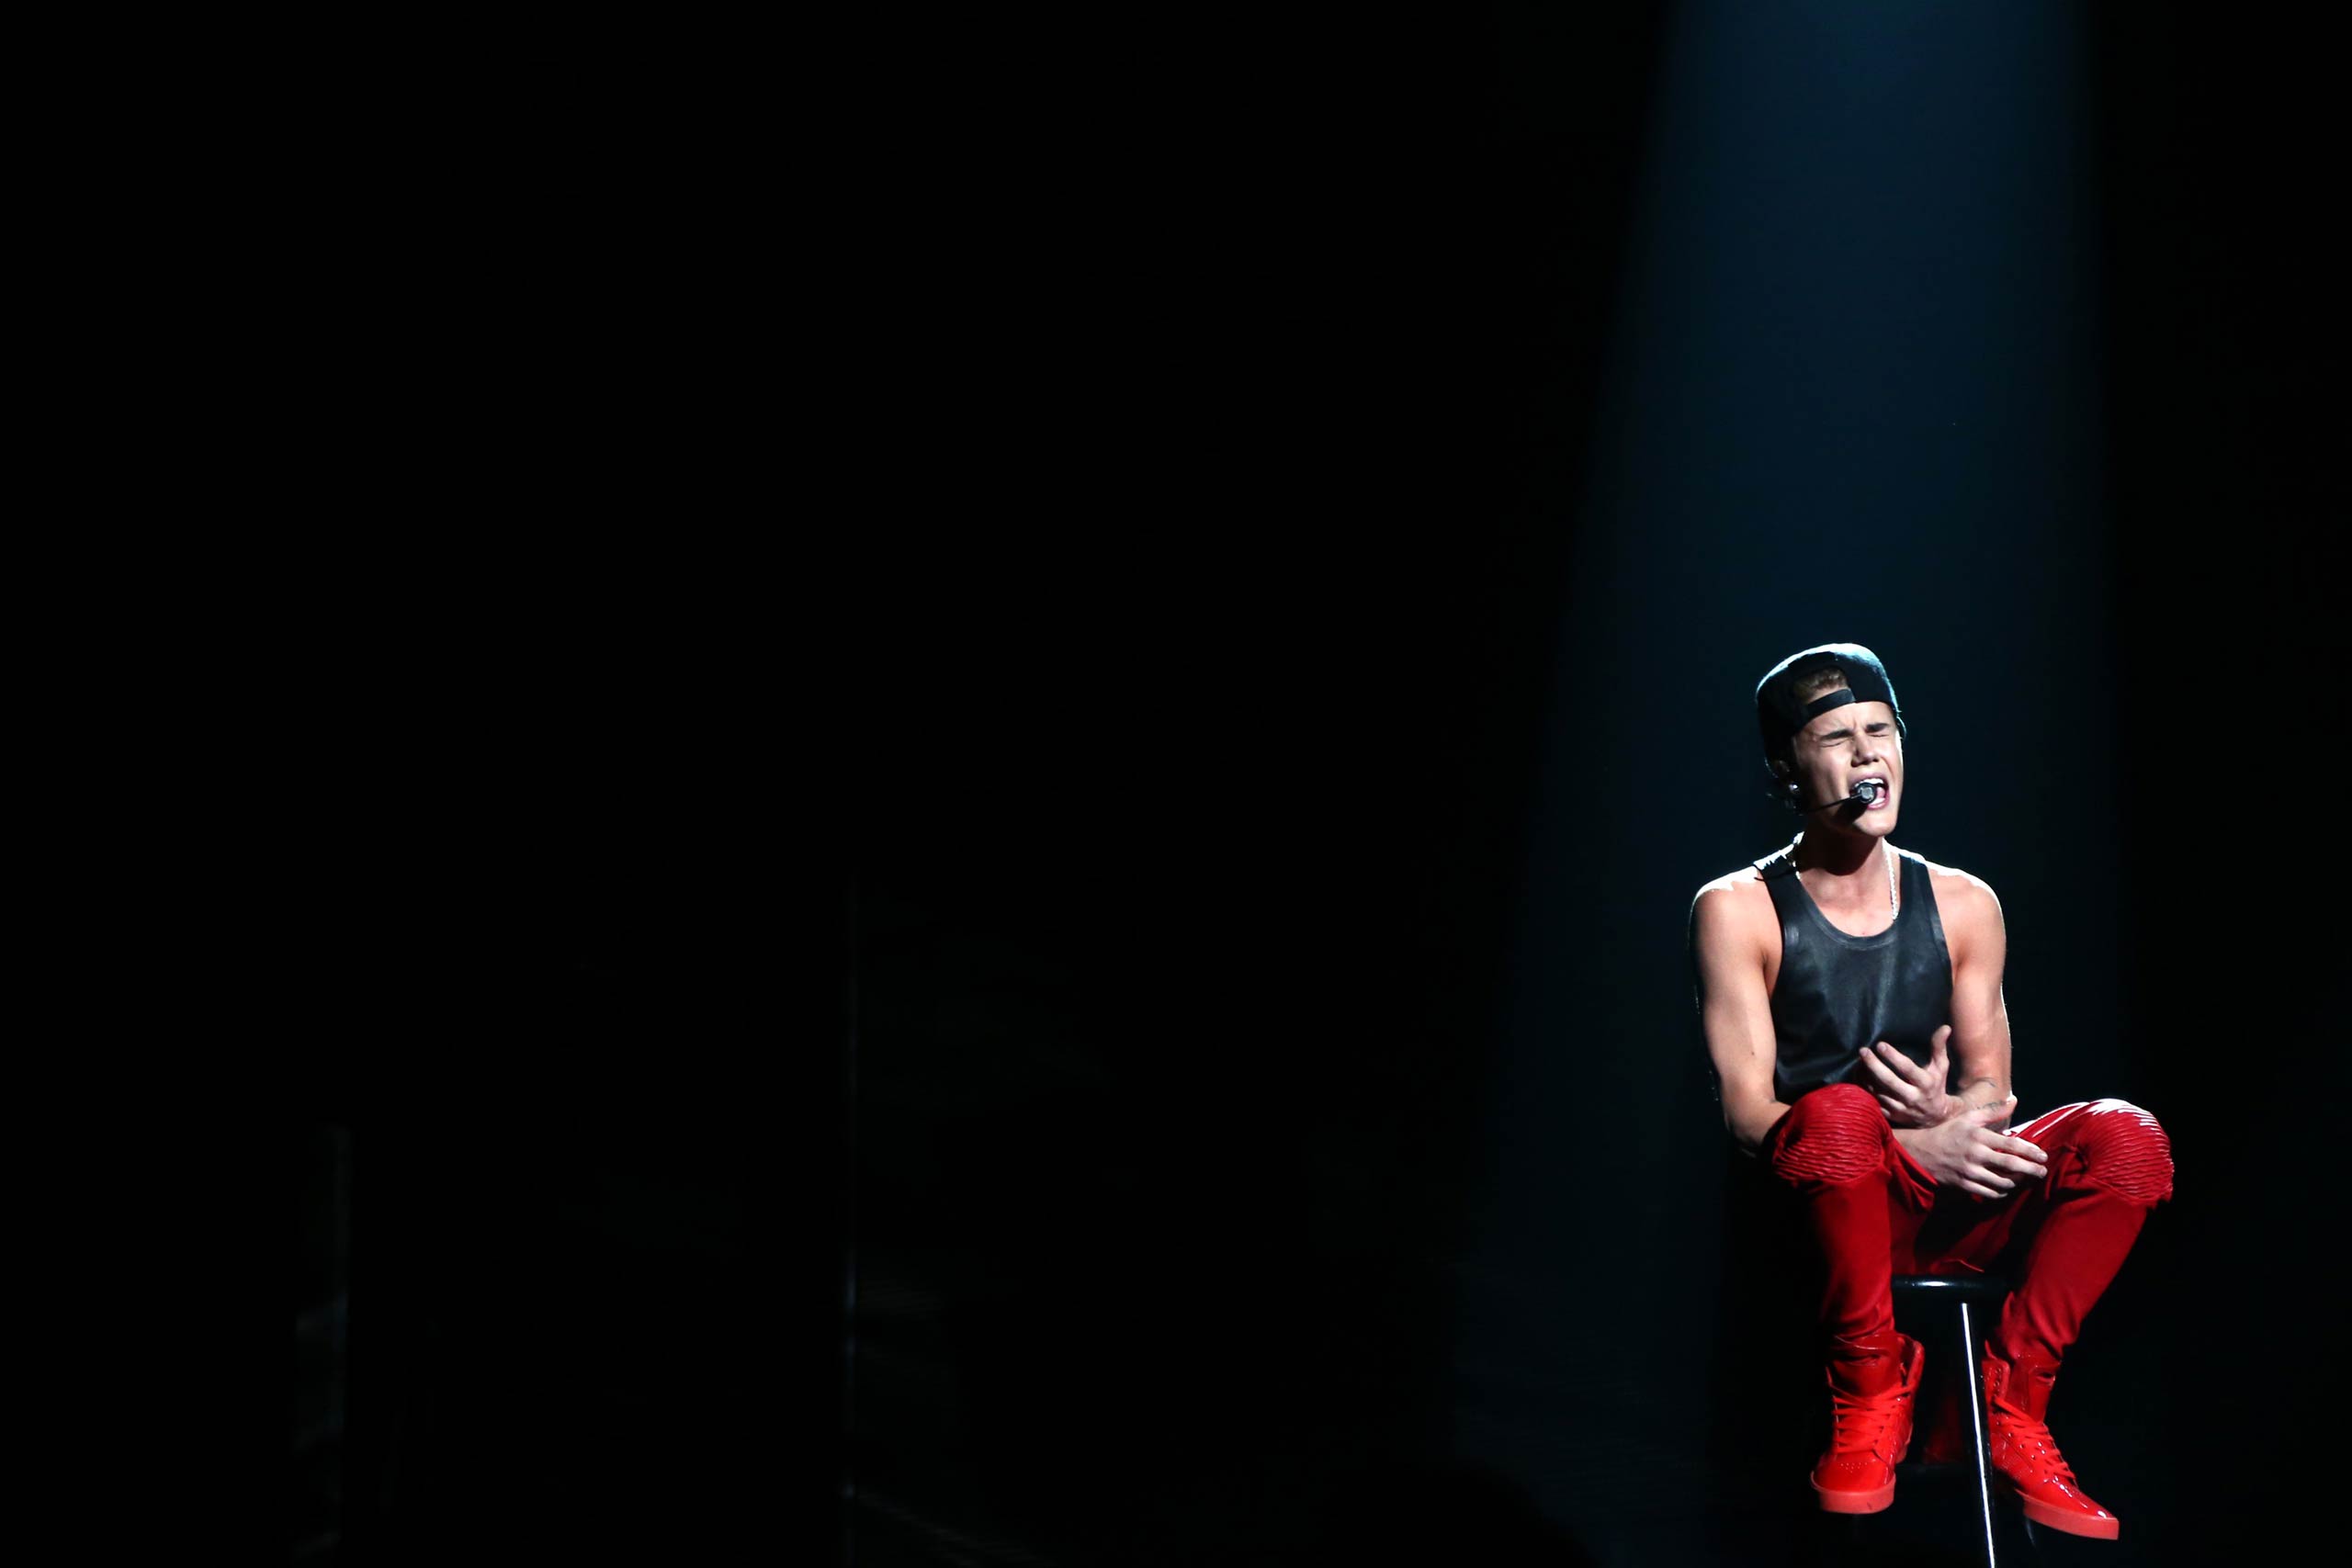 Justin Bieber performs onstage at the 40th American Music Awards held at Nokia Theatre L.A. Live in Los Angeles, Calif. in 2012.